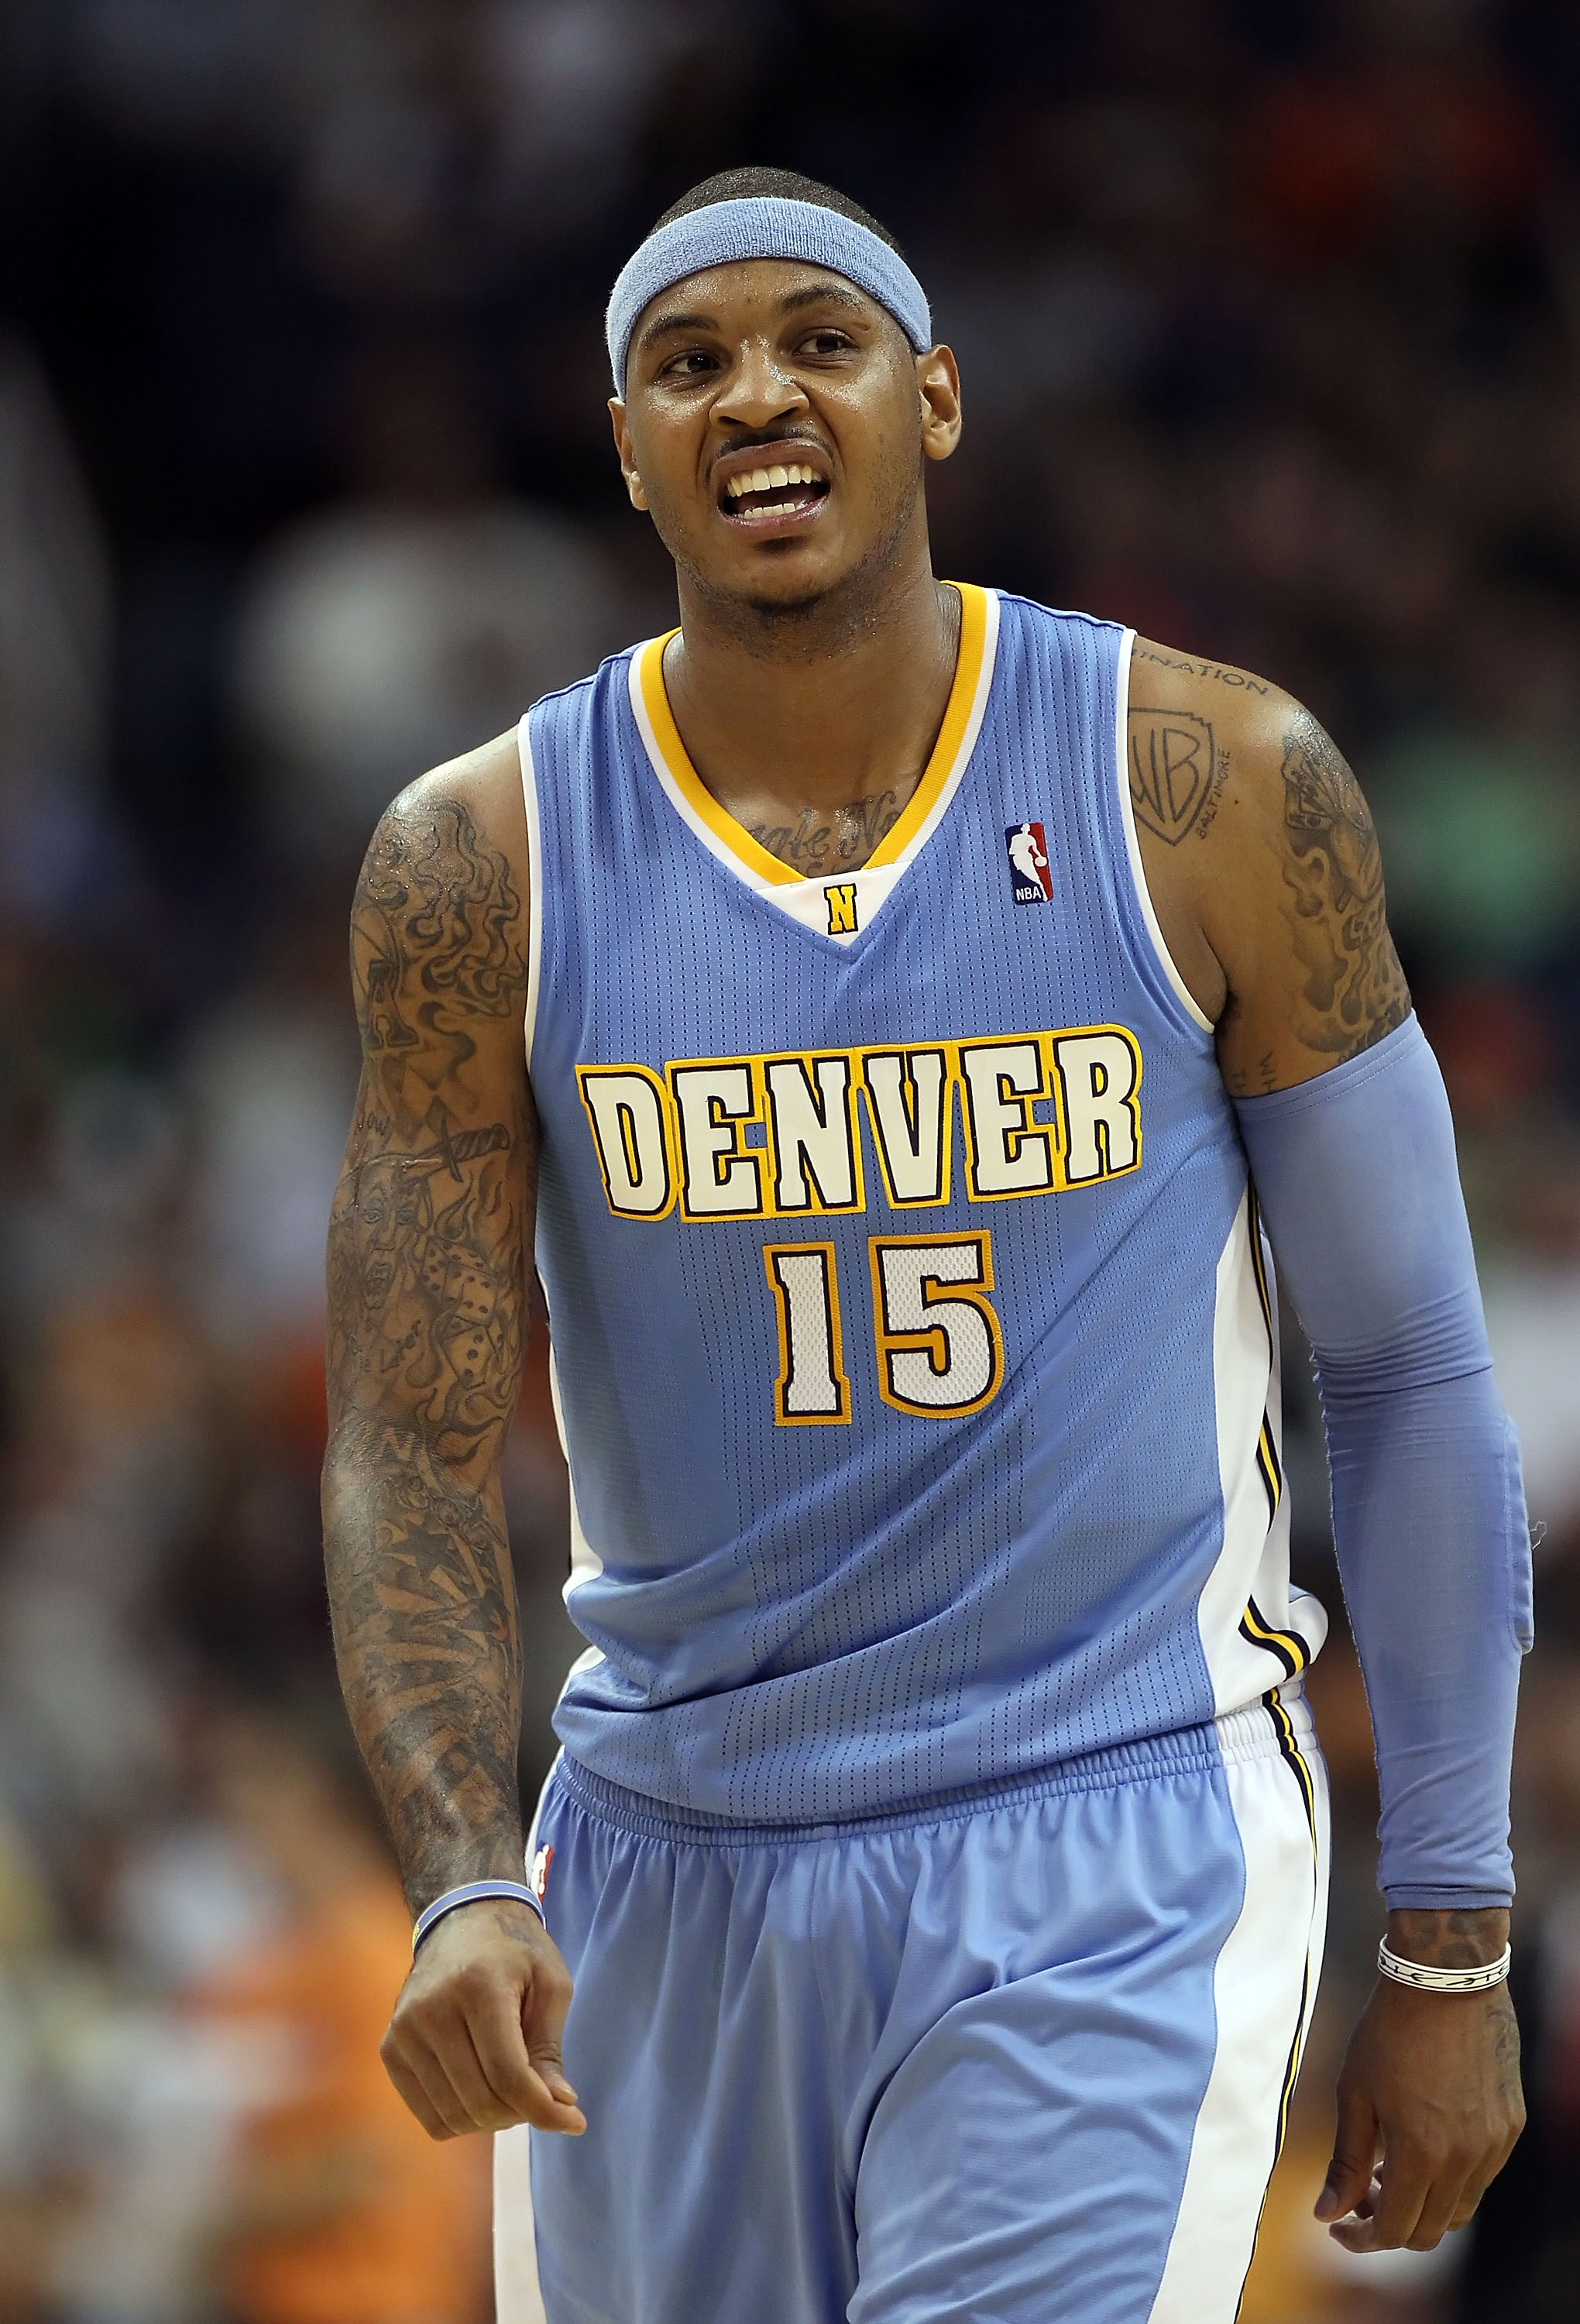 PHOENIX - NOVEMBER 15:  Carmelo Anthony #15 of the Denver Nuggets during the NBA game against the Phoenix Suns at US Airways Center on November 15, 2010 in Phoenix, Arizona.  The Suns defeated the Nuggets 100-94.  NOTE TO USER: User expressly acknowledges